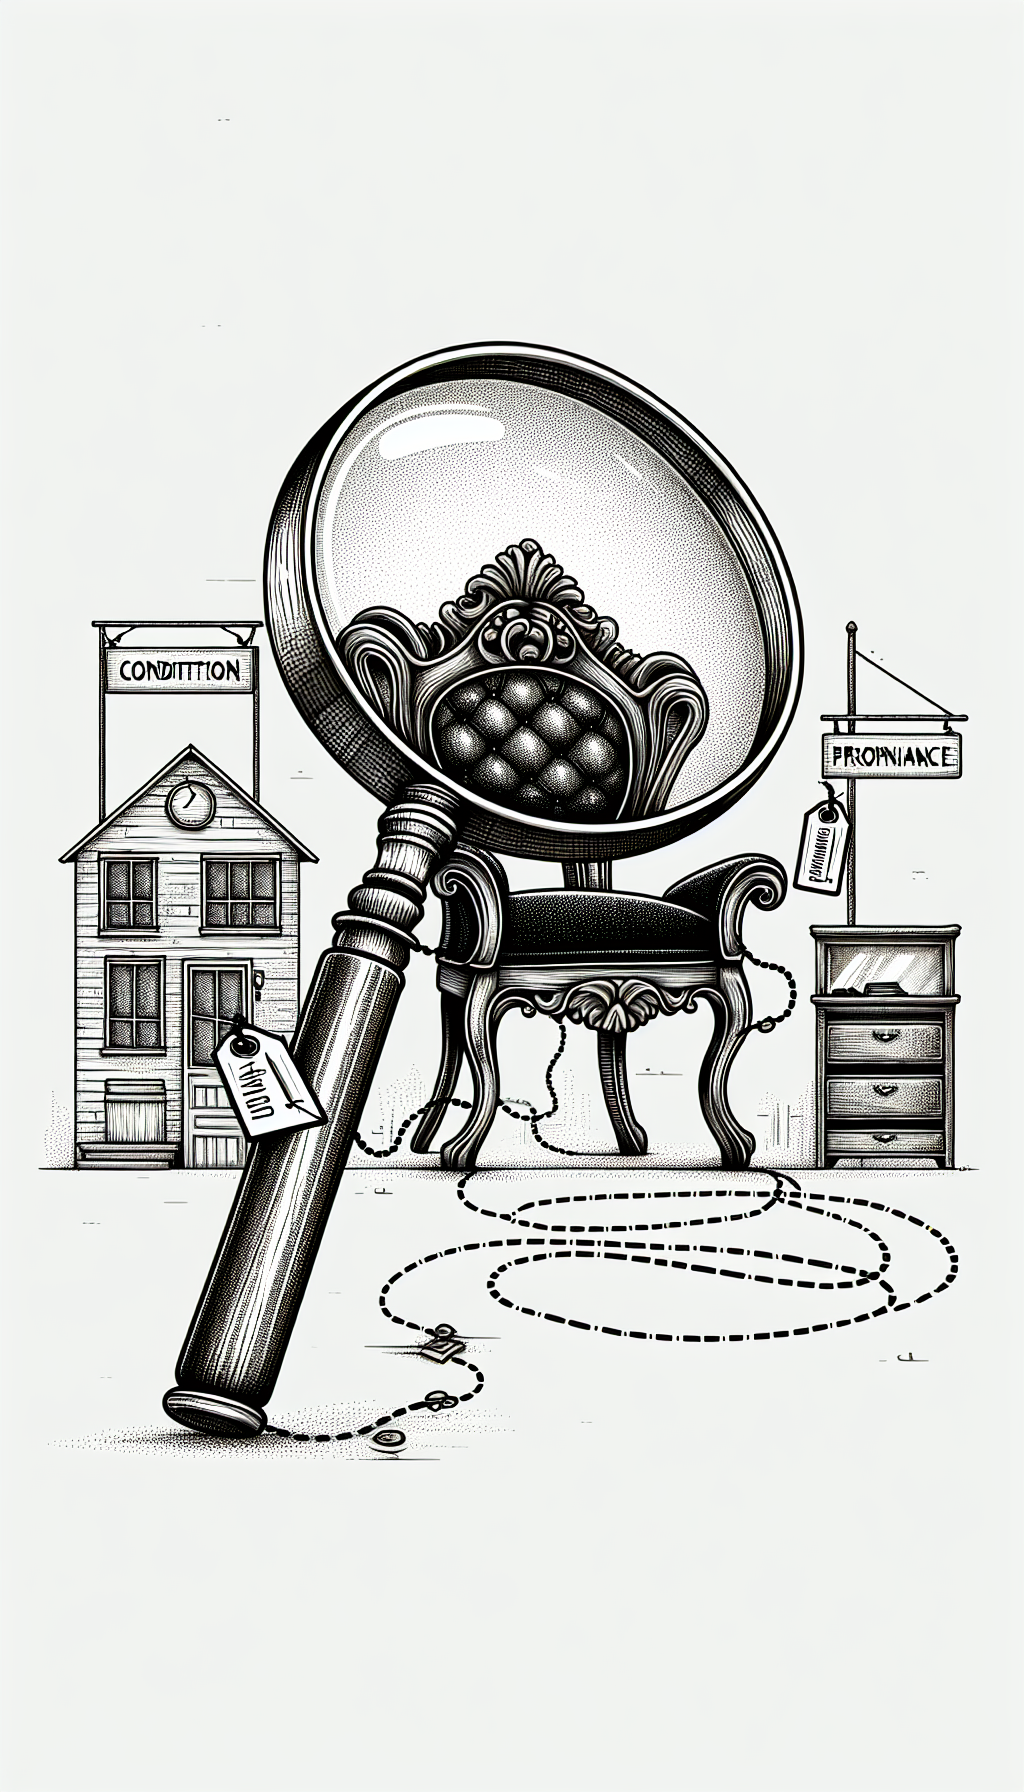 A whimsical line drawing depicts a magnifying glass poised over an ornate antique chair, with various tags labeled 'Condition', 'Authenticity', and 'Provenance' hanging off its carved armrests. A dotted path leads from the chair to a storefront with a sign reading 'Local Appraisals', symbolizing the journey of preparation and discovery in the furniture appraisal process.